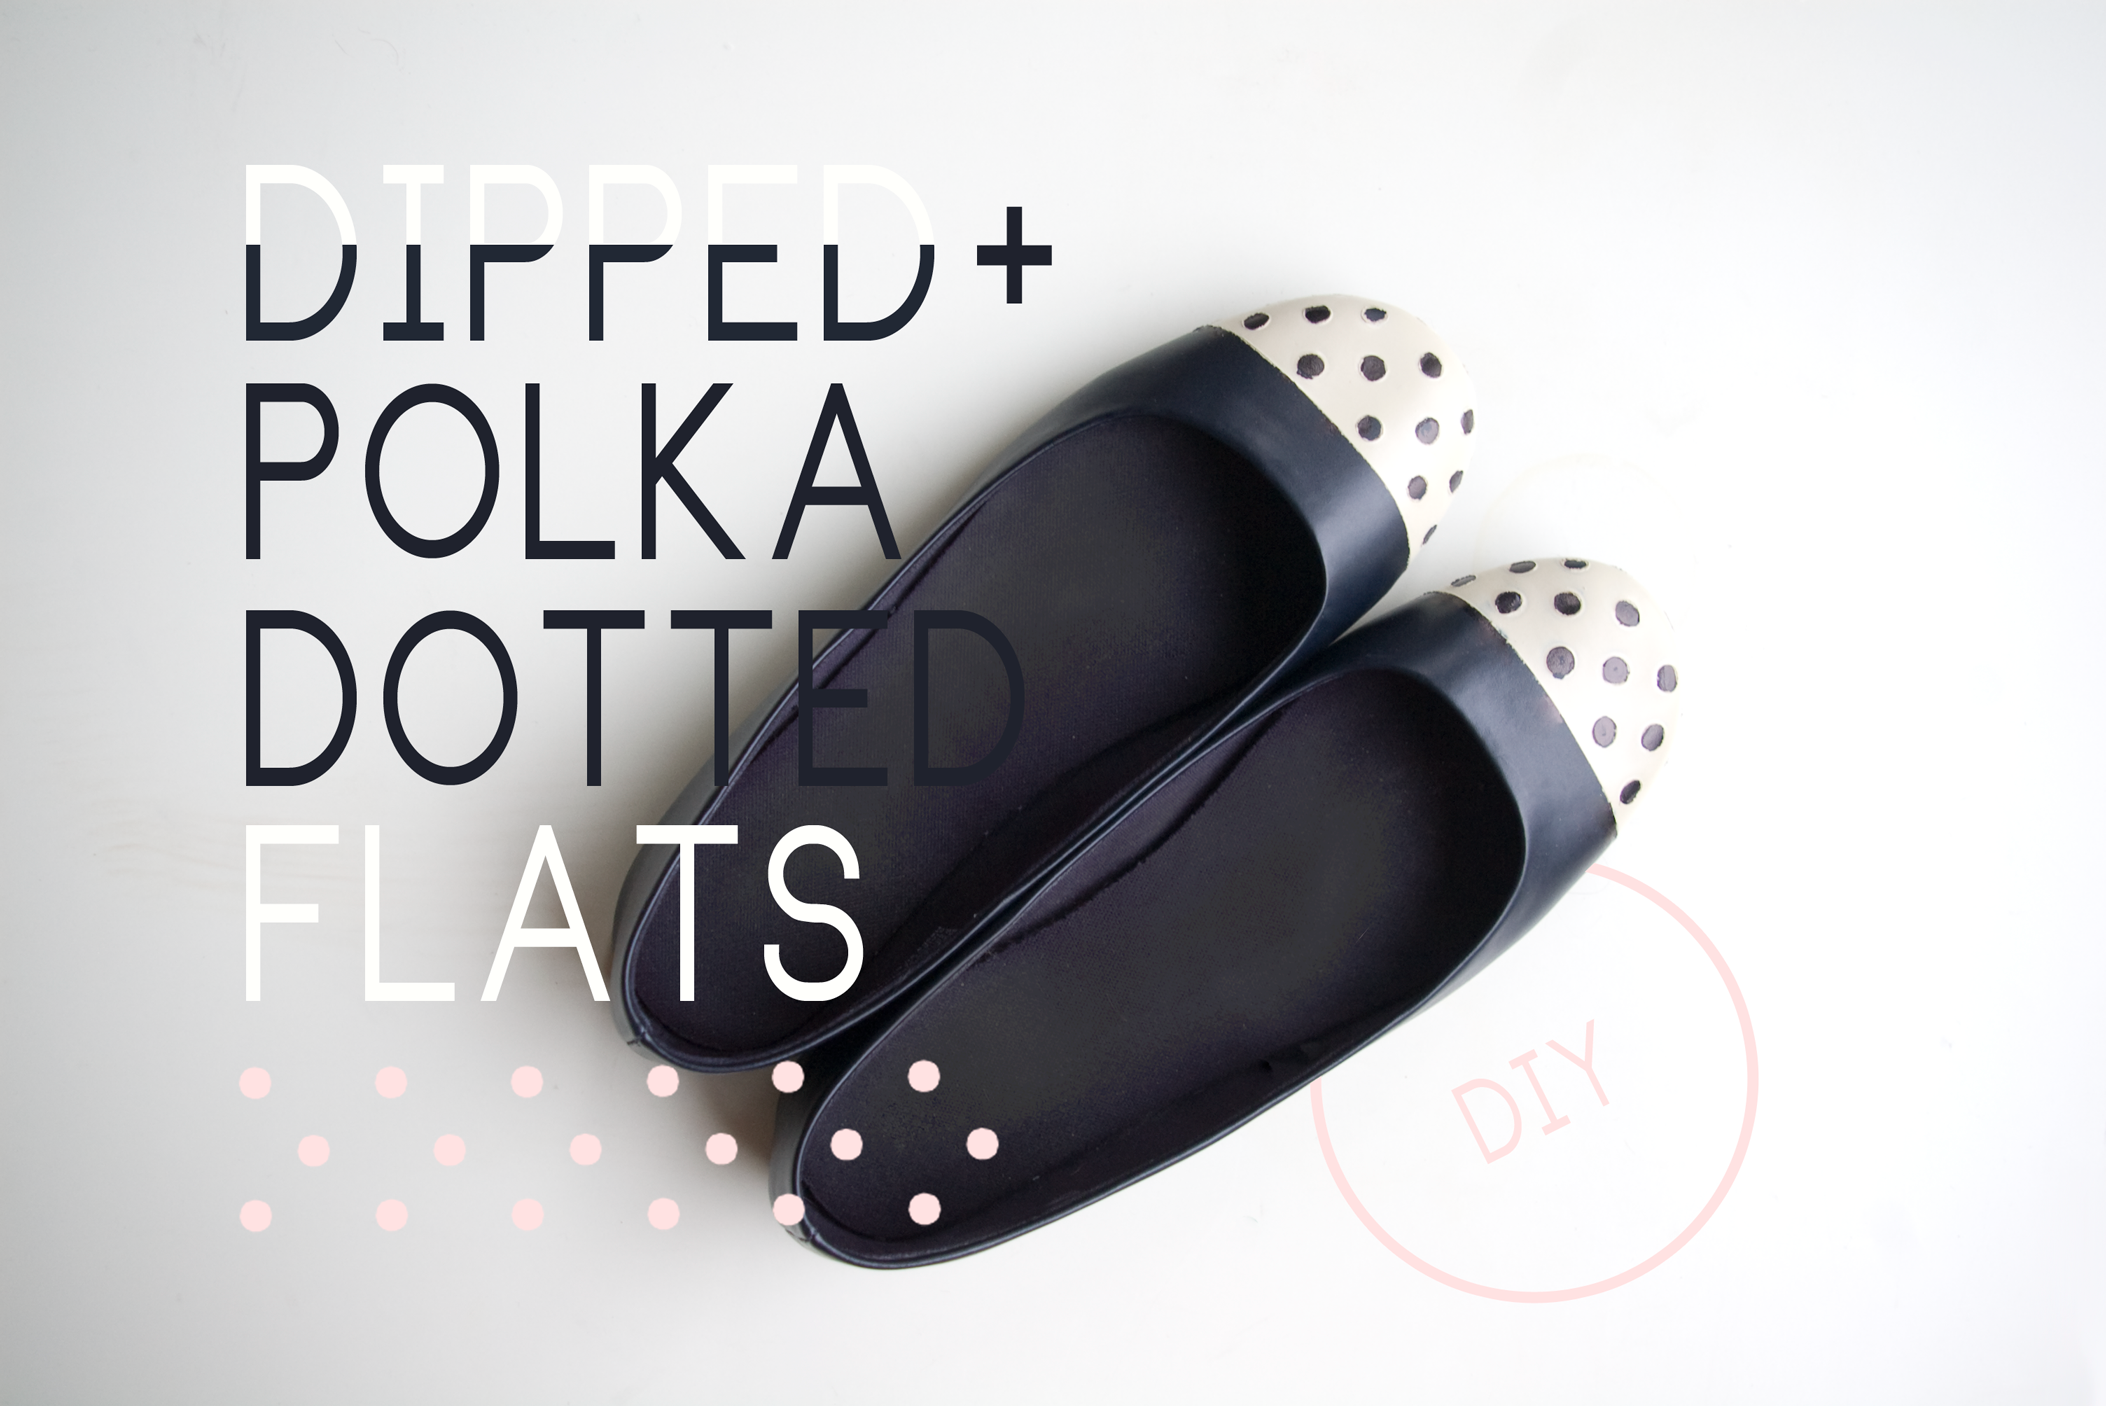 DIY dipped toe and polka dotted flats shoes